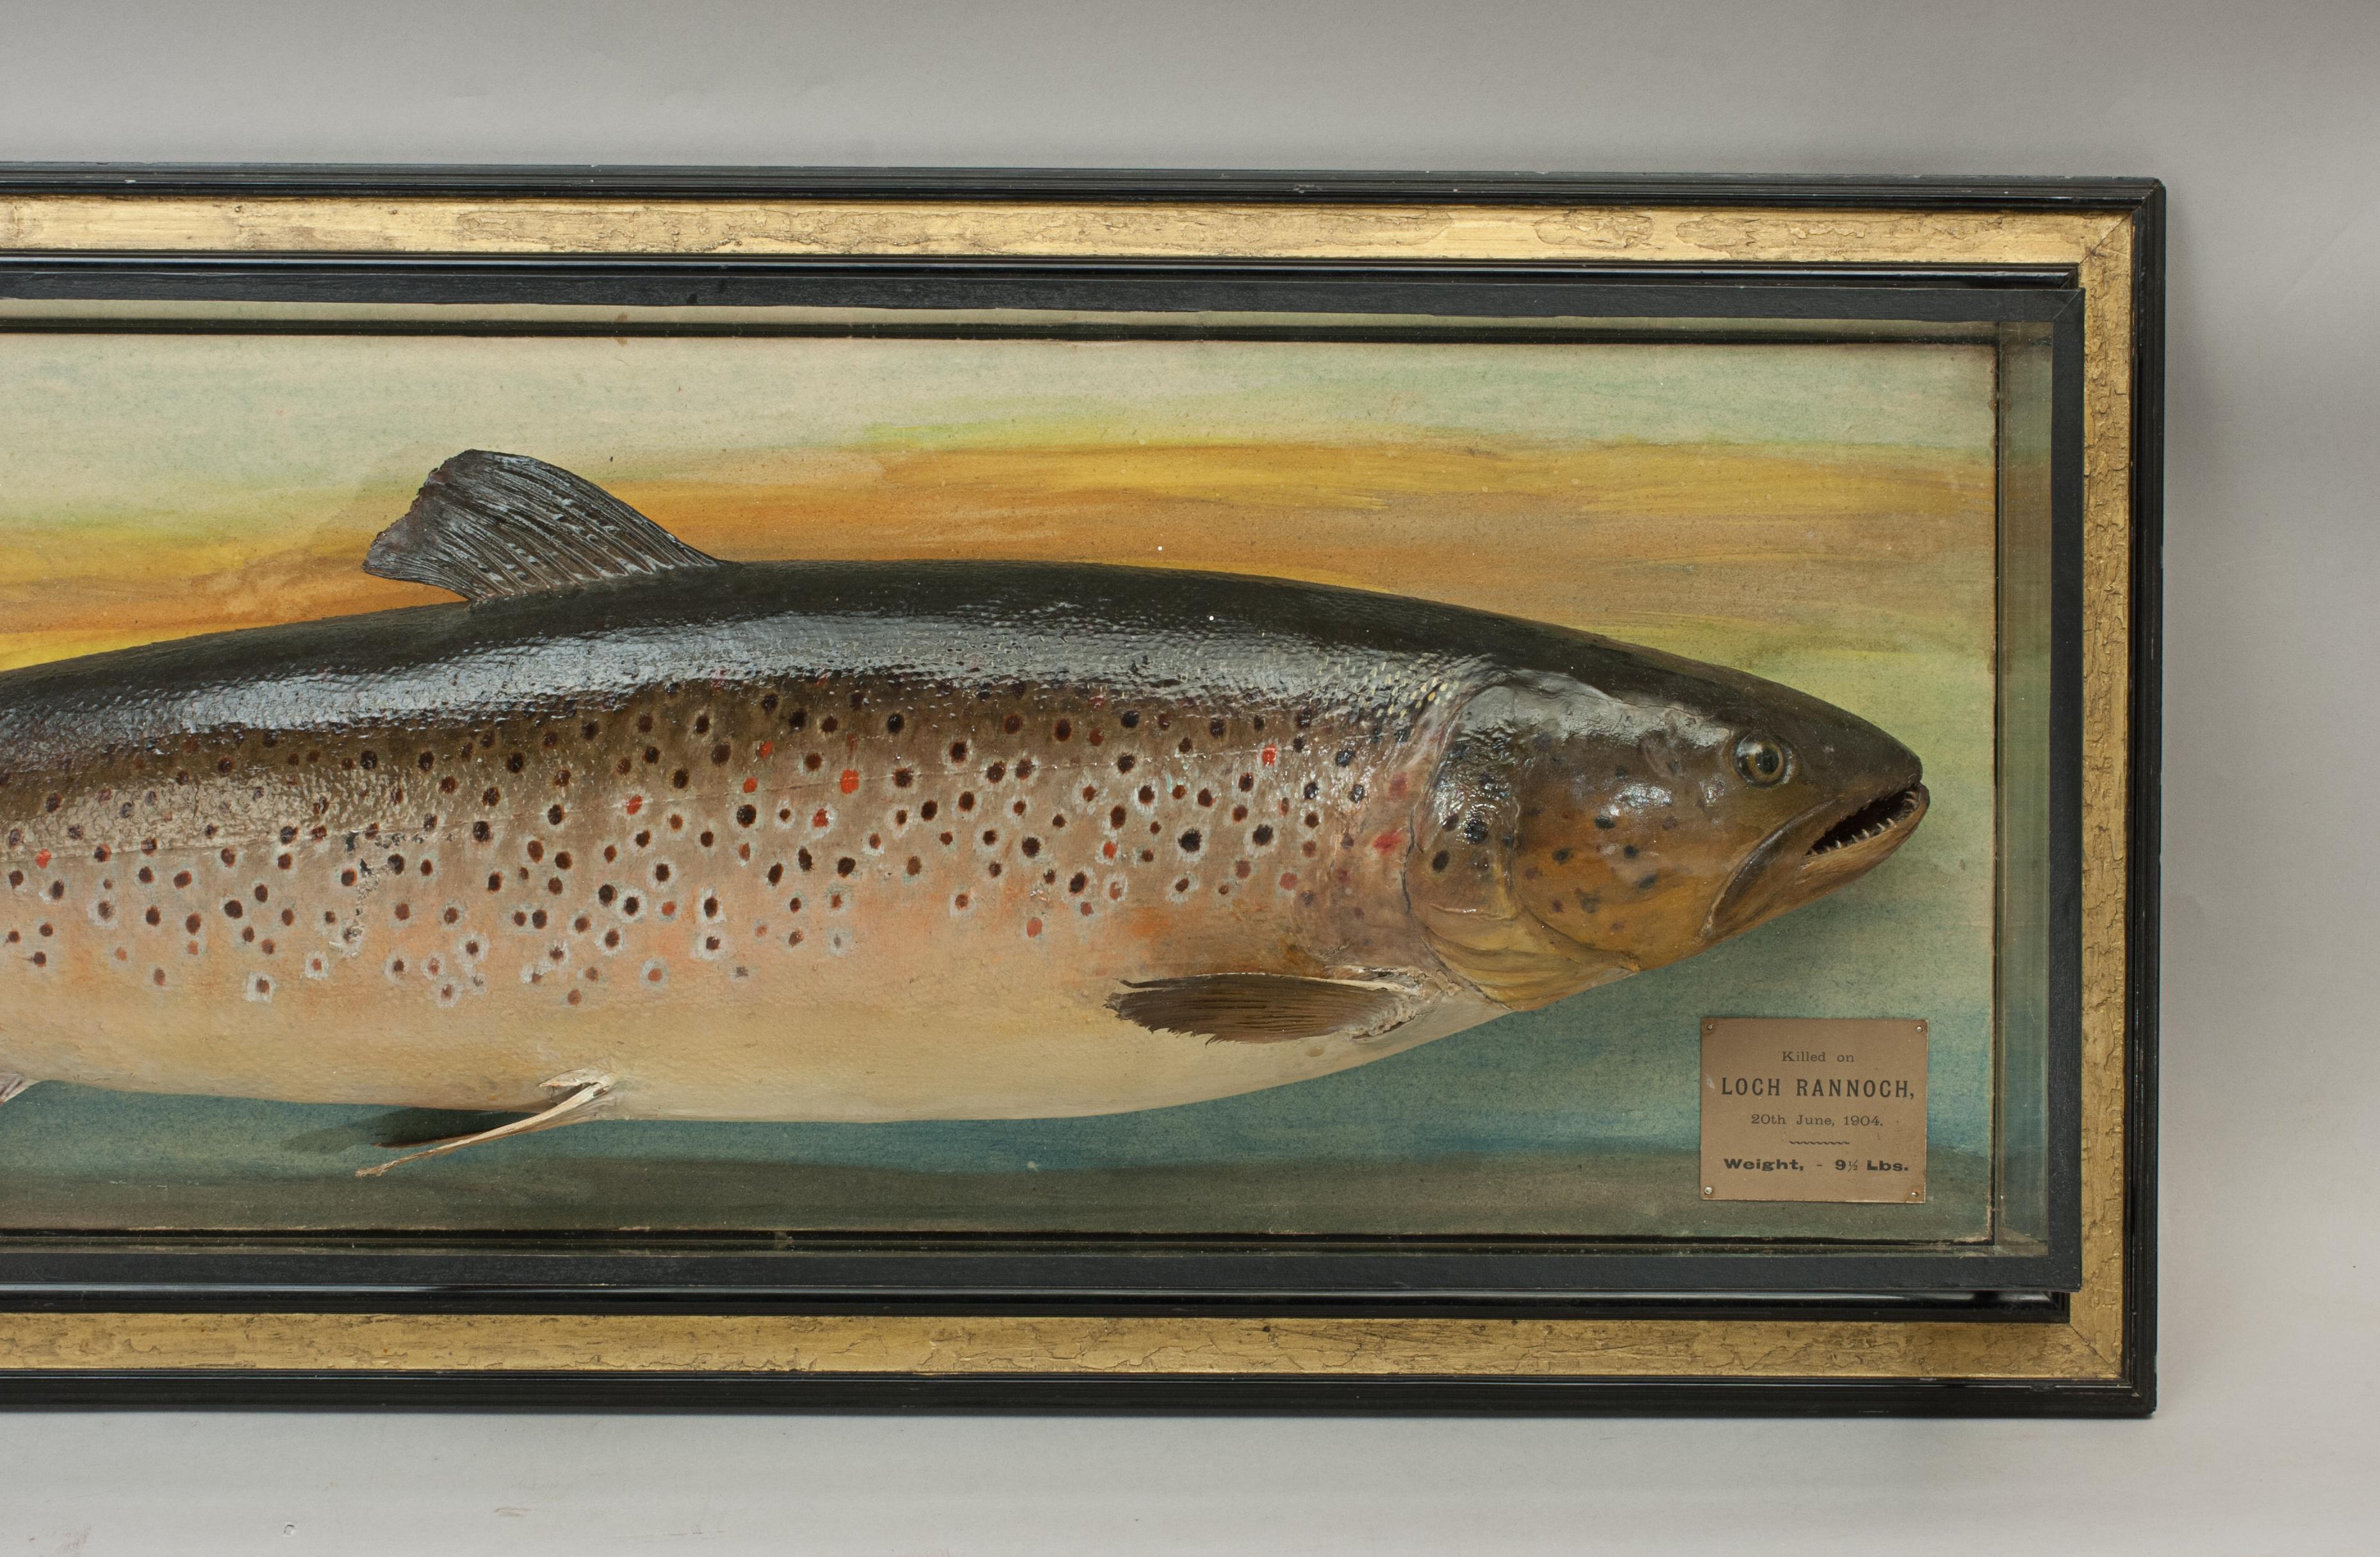 Sporting Art Antique Trophy Fish Model of a Brown Trout by Malloch of Perth